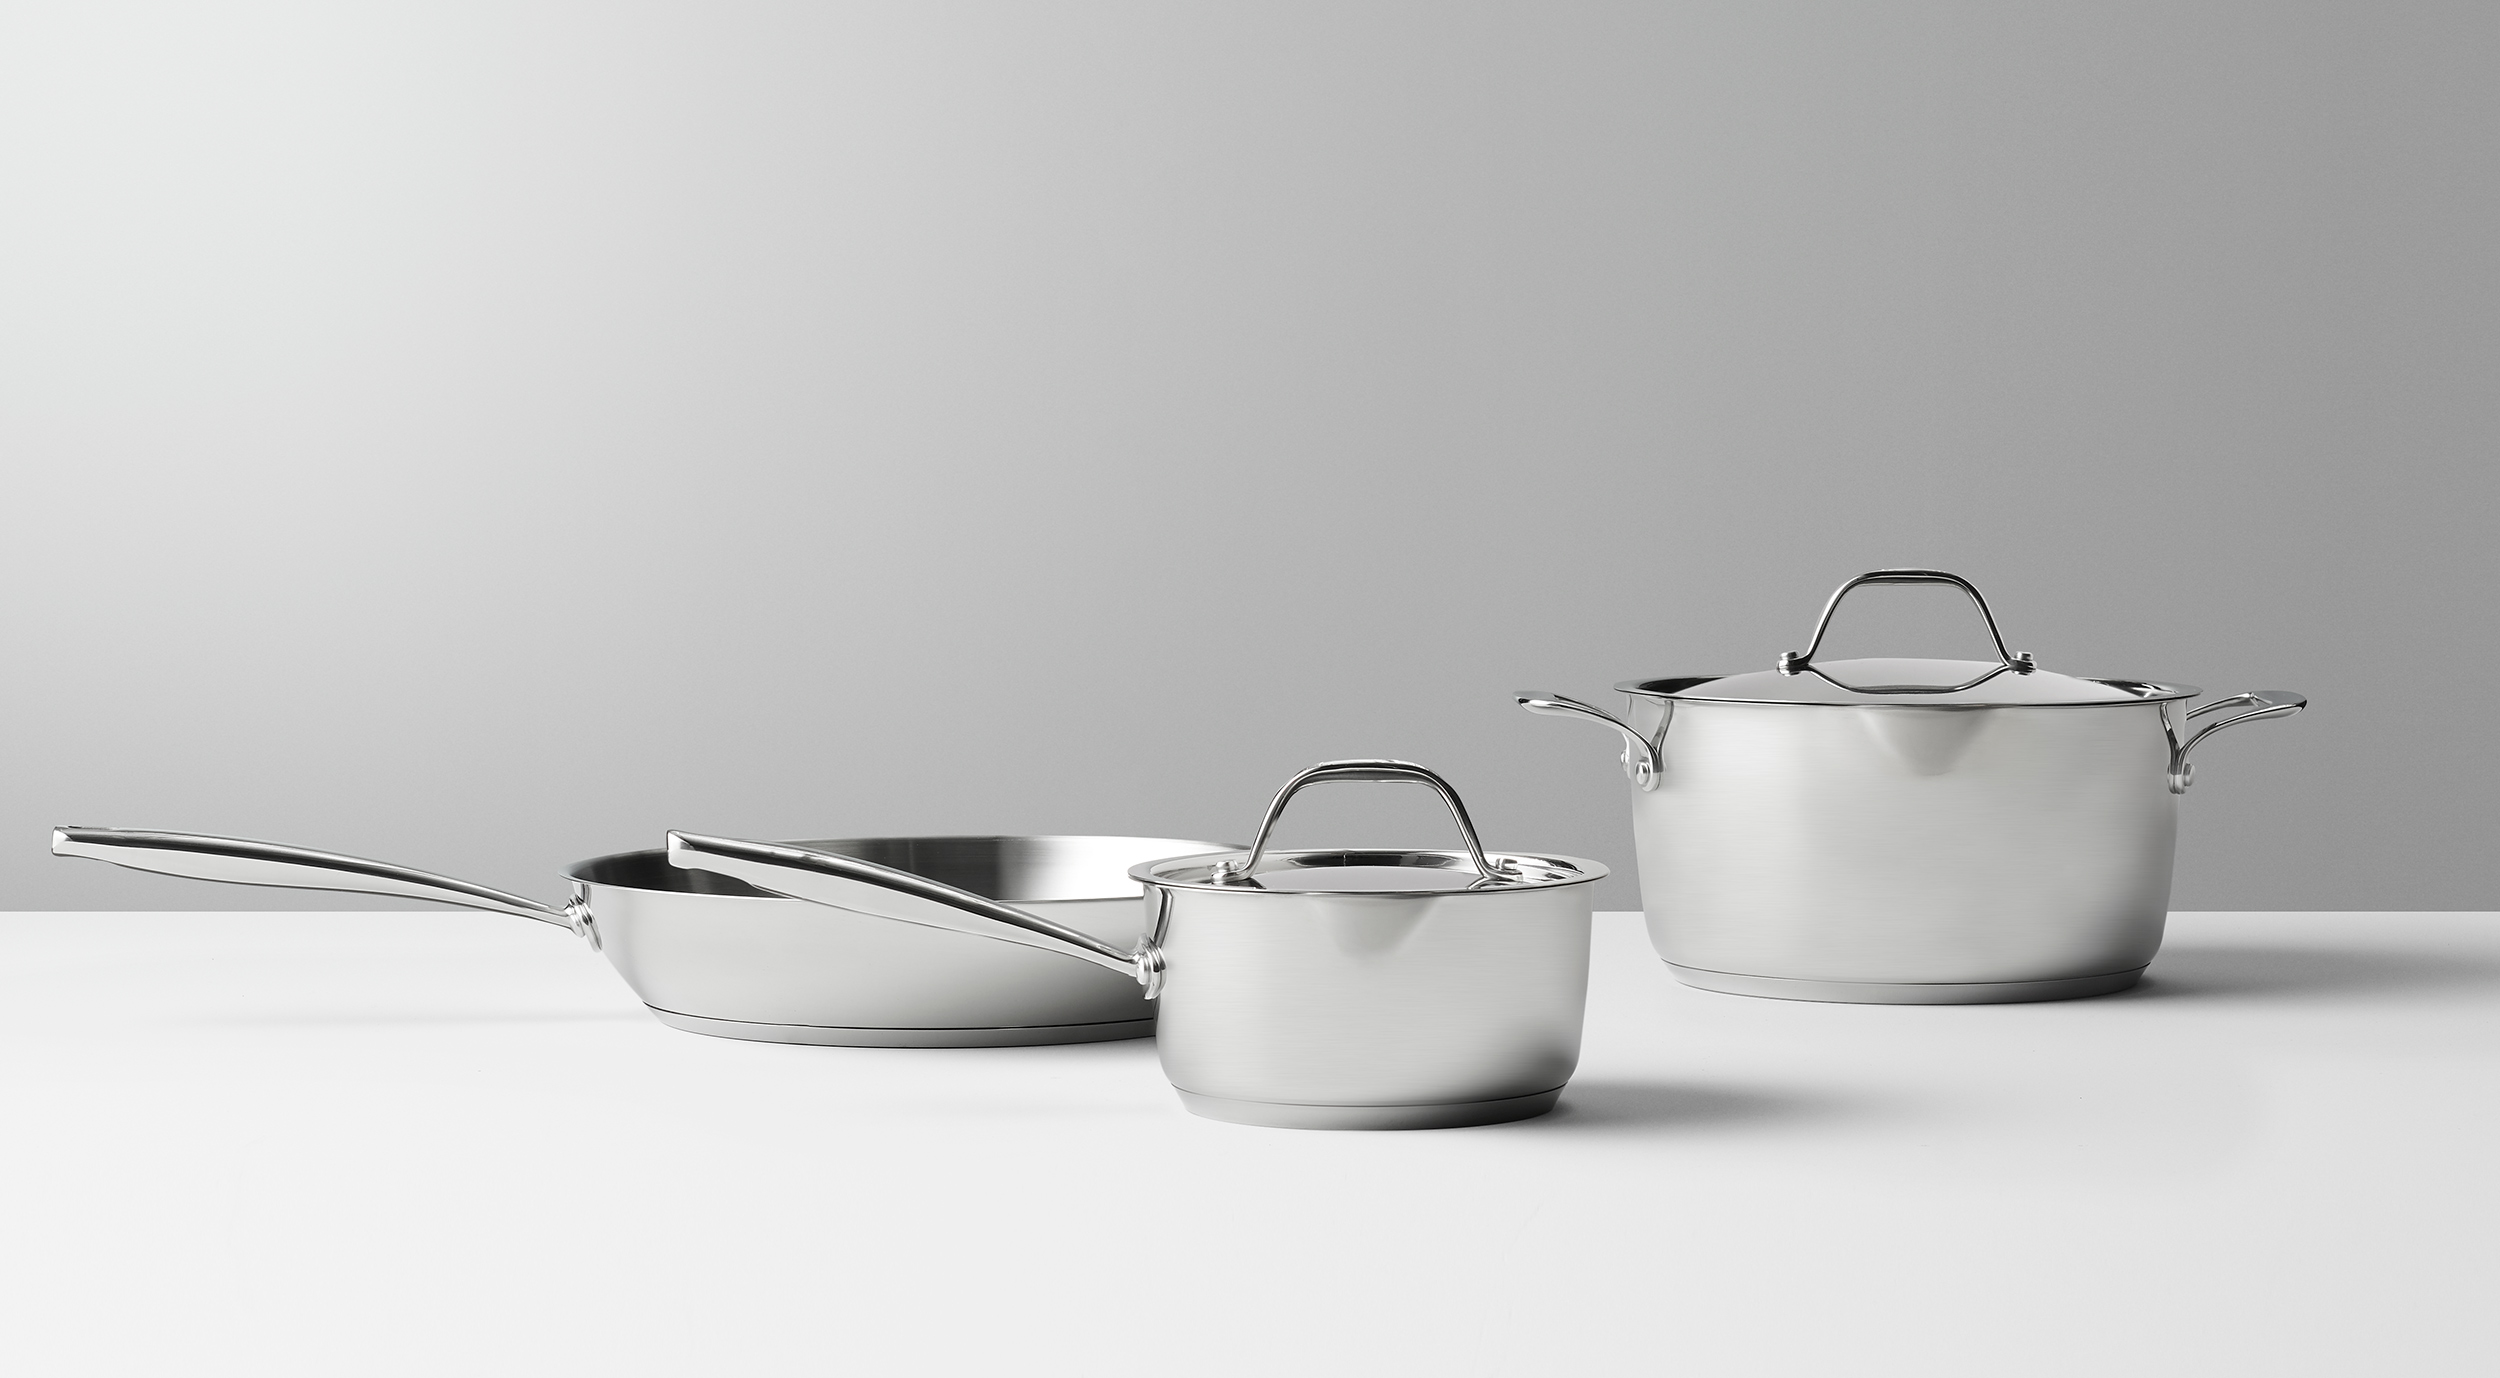 C-000963-01-052_070-01-0027_Stainless-Steel-Cookware-Set-5pc---Made-By-Design_straight-on